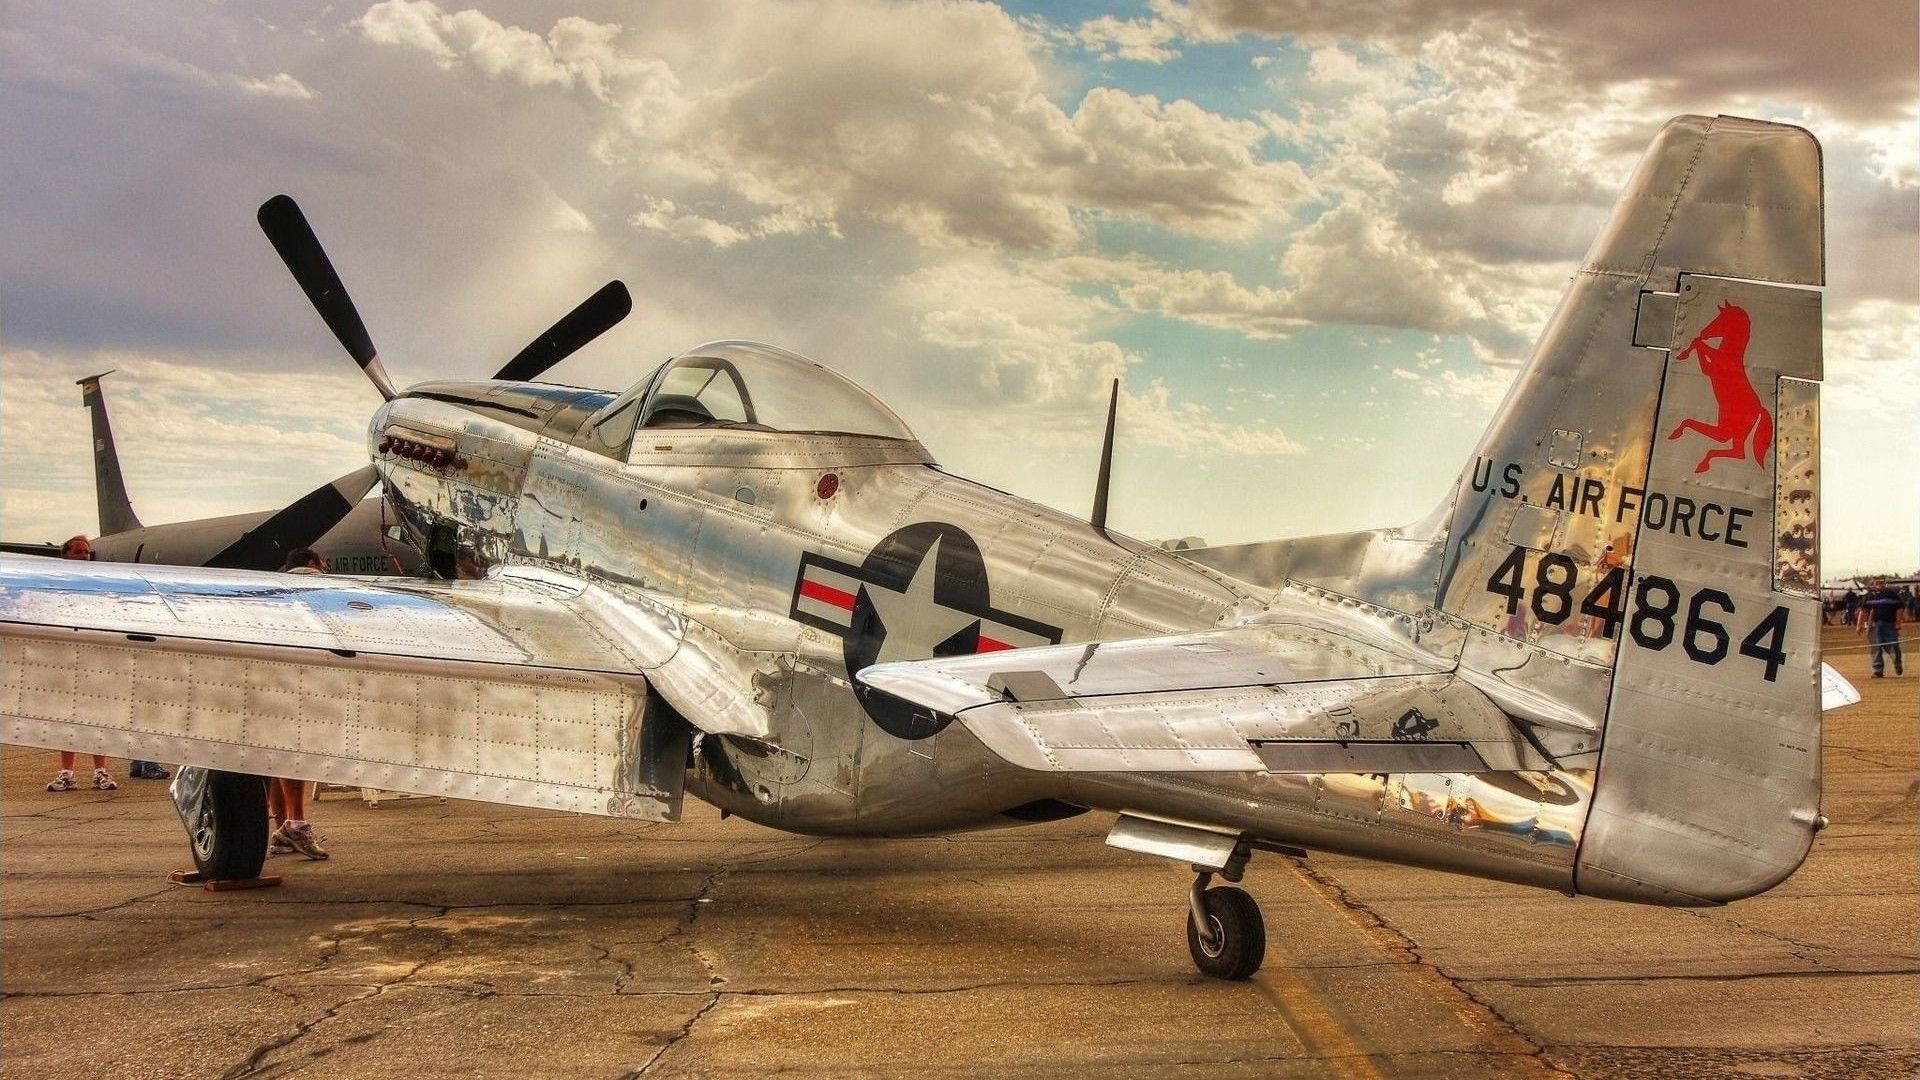 The Aircraft Is A P51 Mustang 